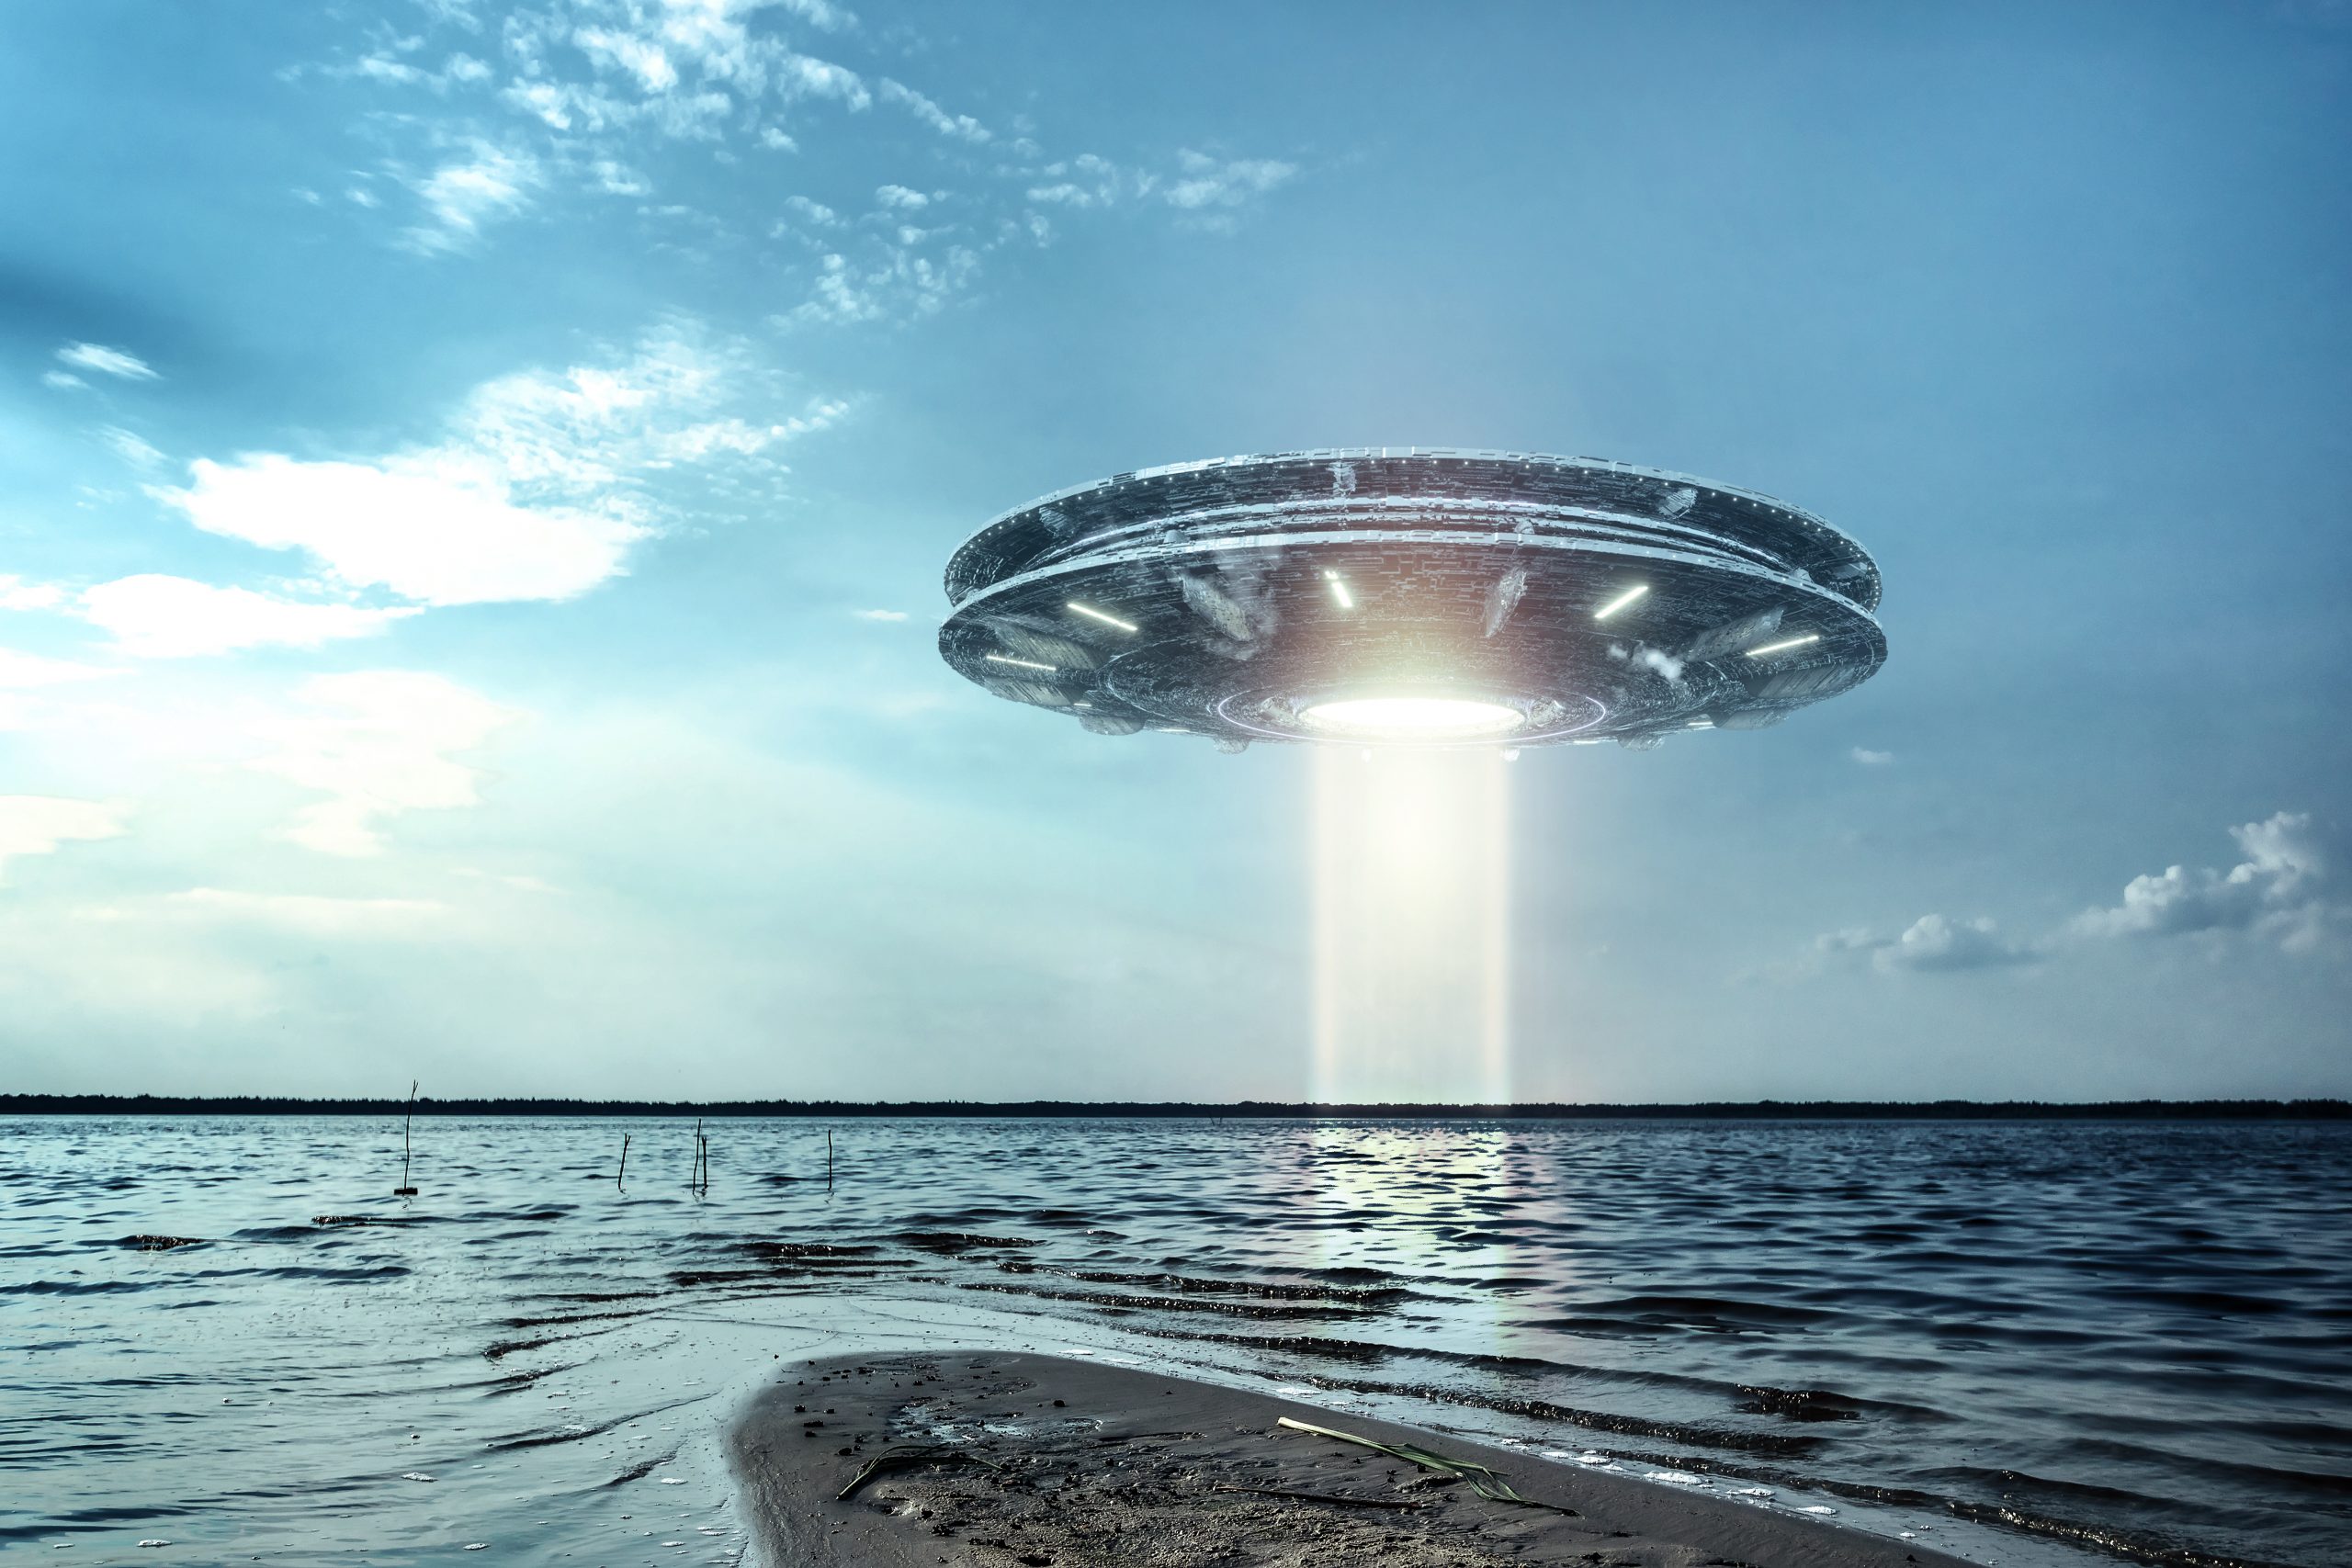 An artistic rendering of a UFO hovering in the sky. Depositphotos.